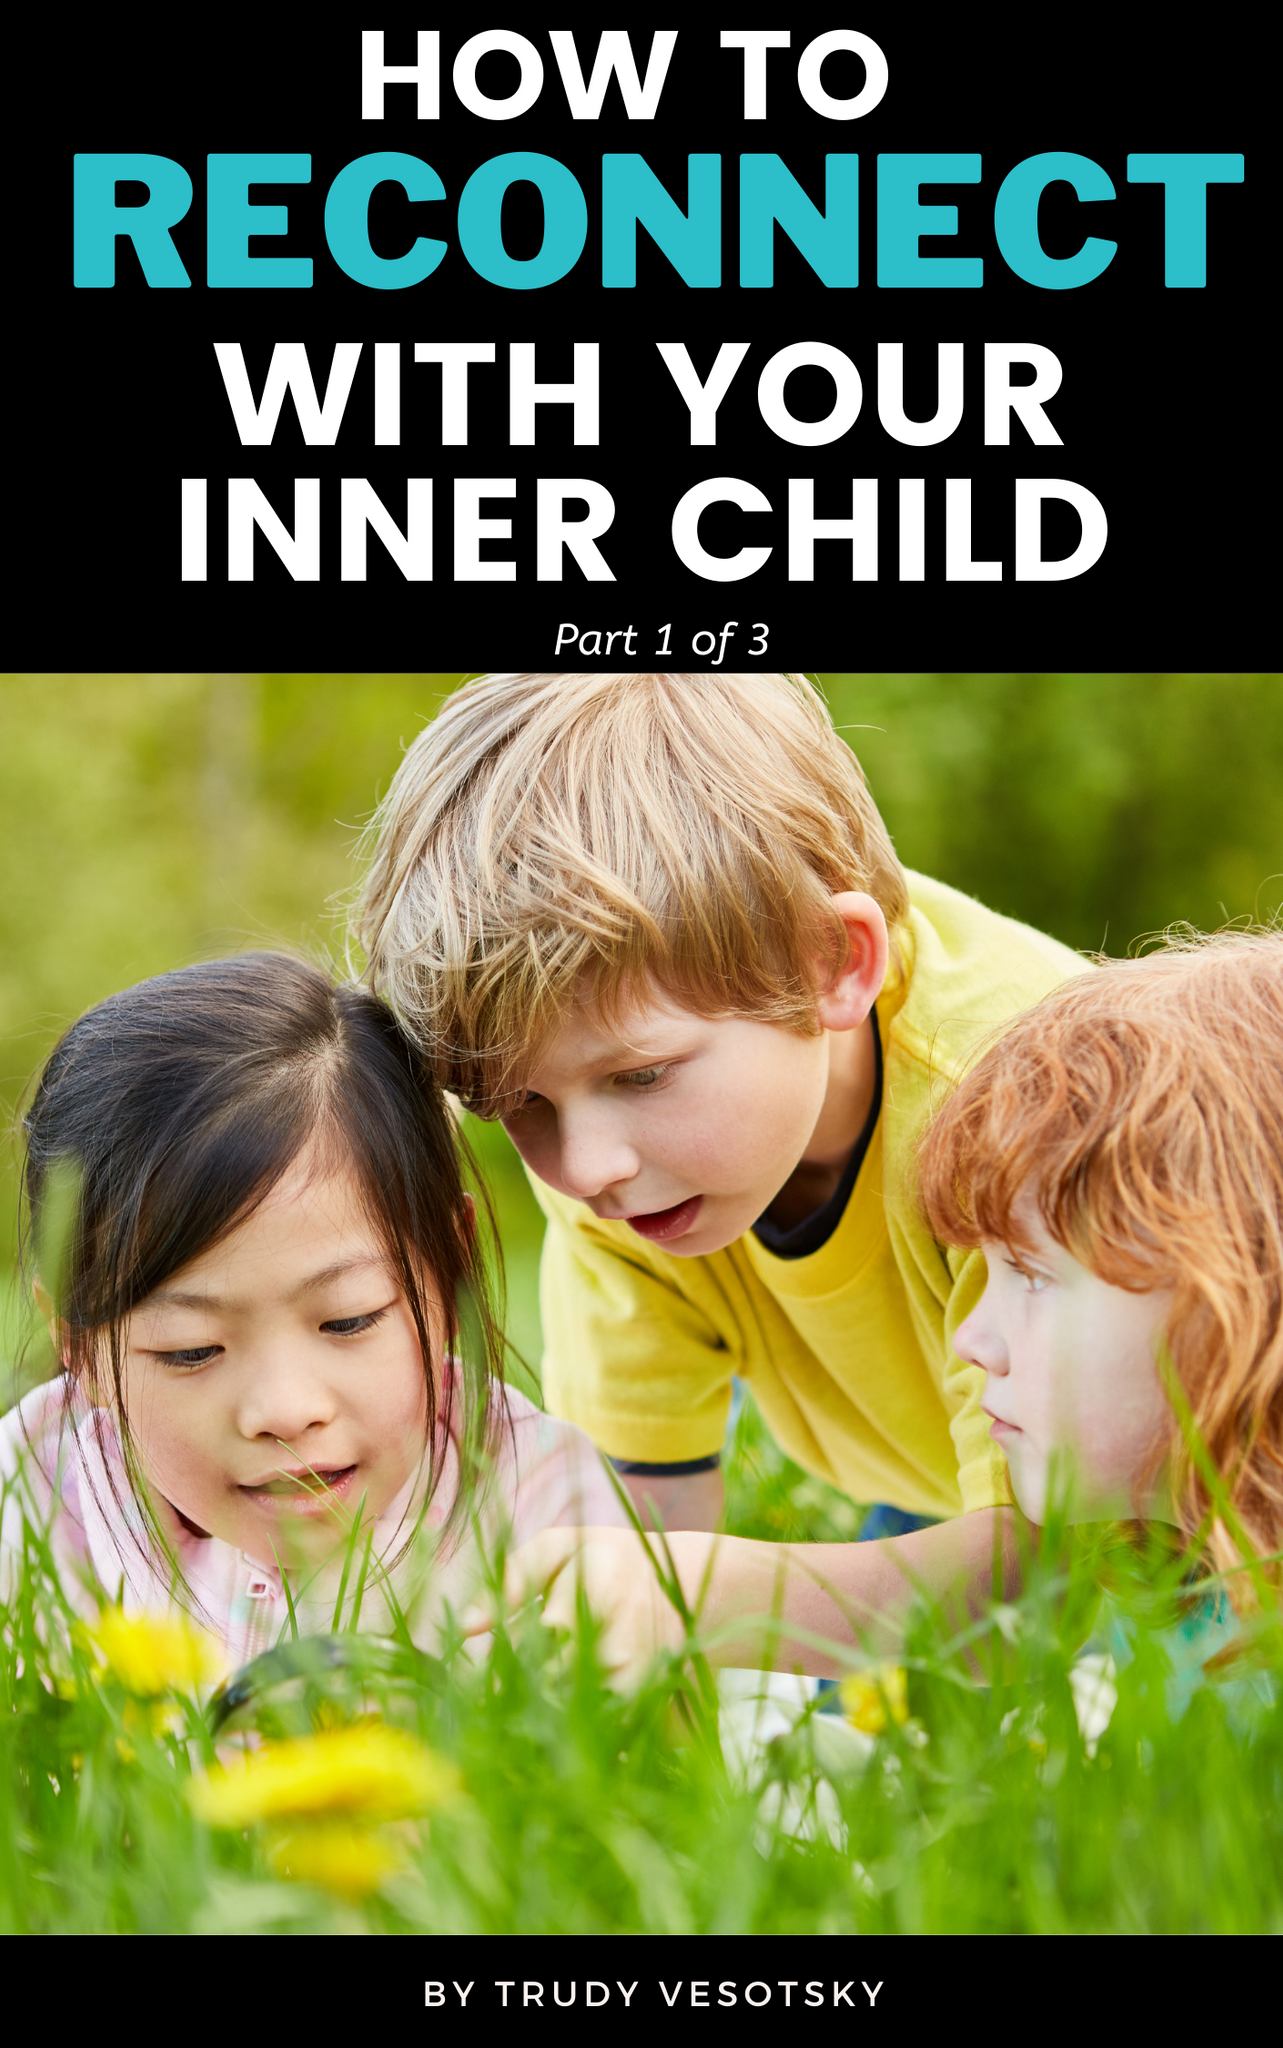 How to Reconnect with your Inner Child  - Part 1